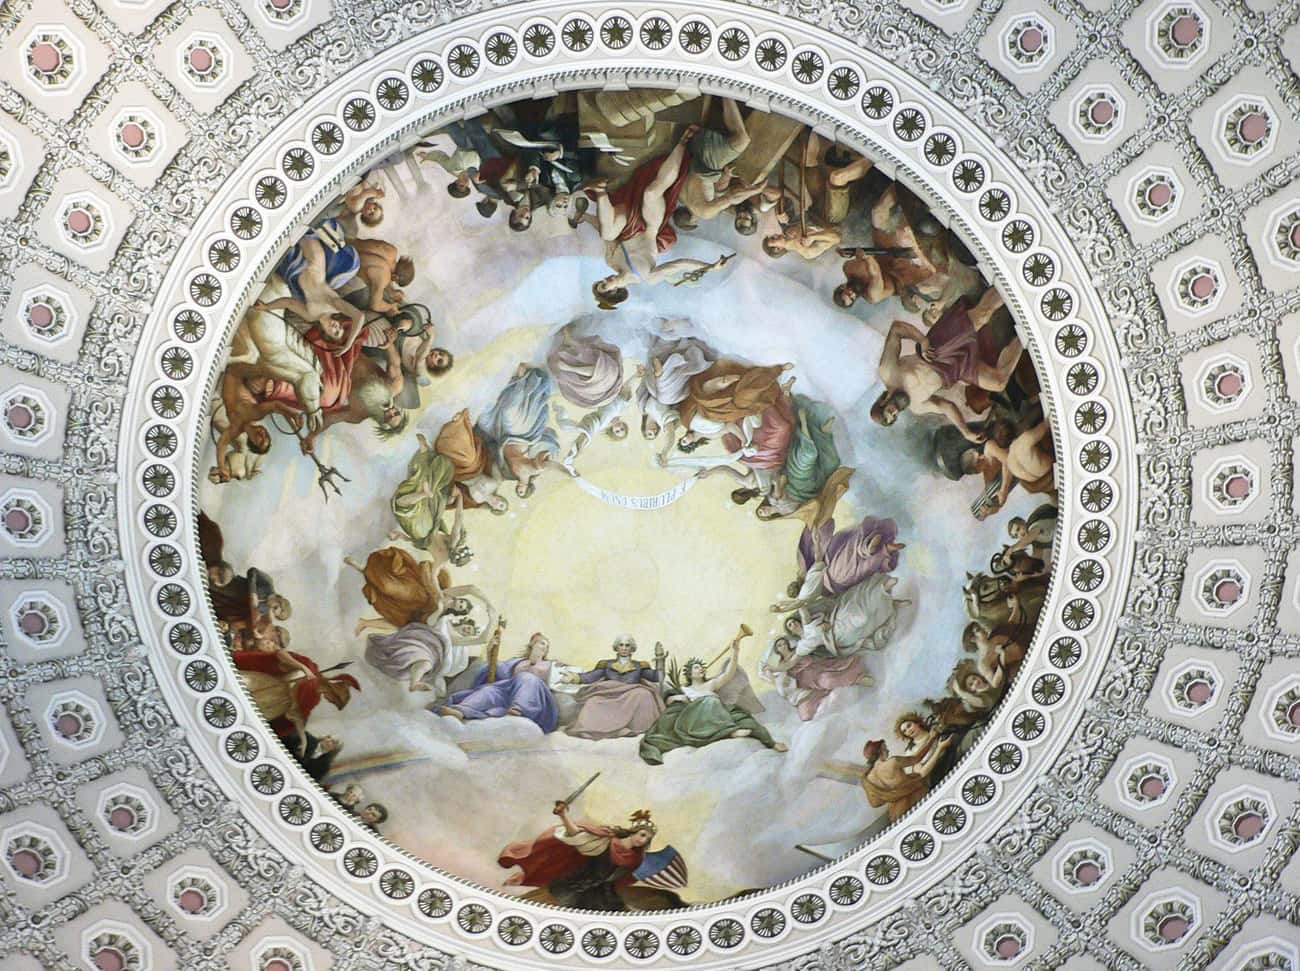 The Rotunda Of The Capitol Building Shows George Washington Becoming A God